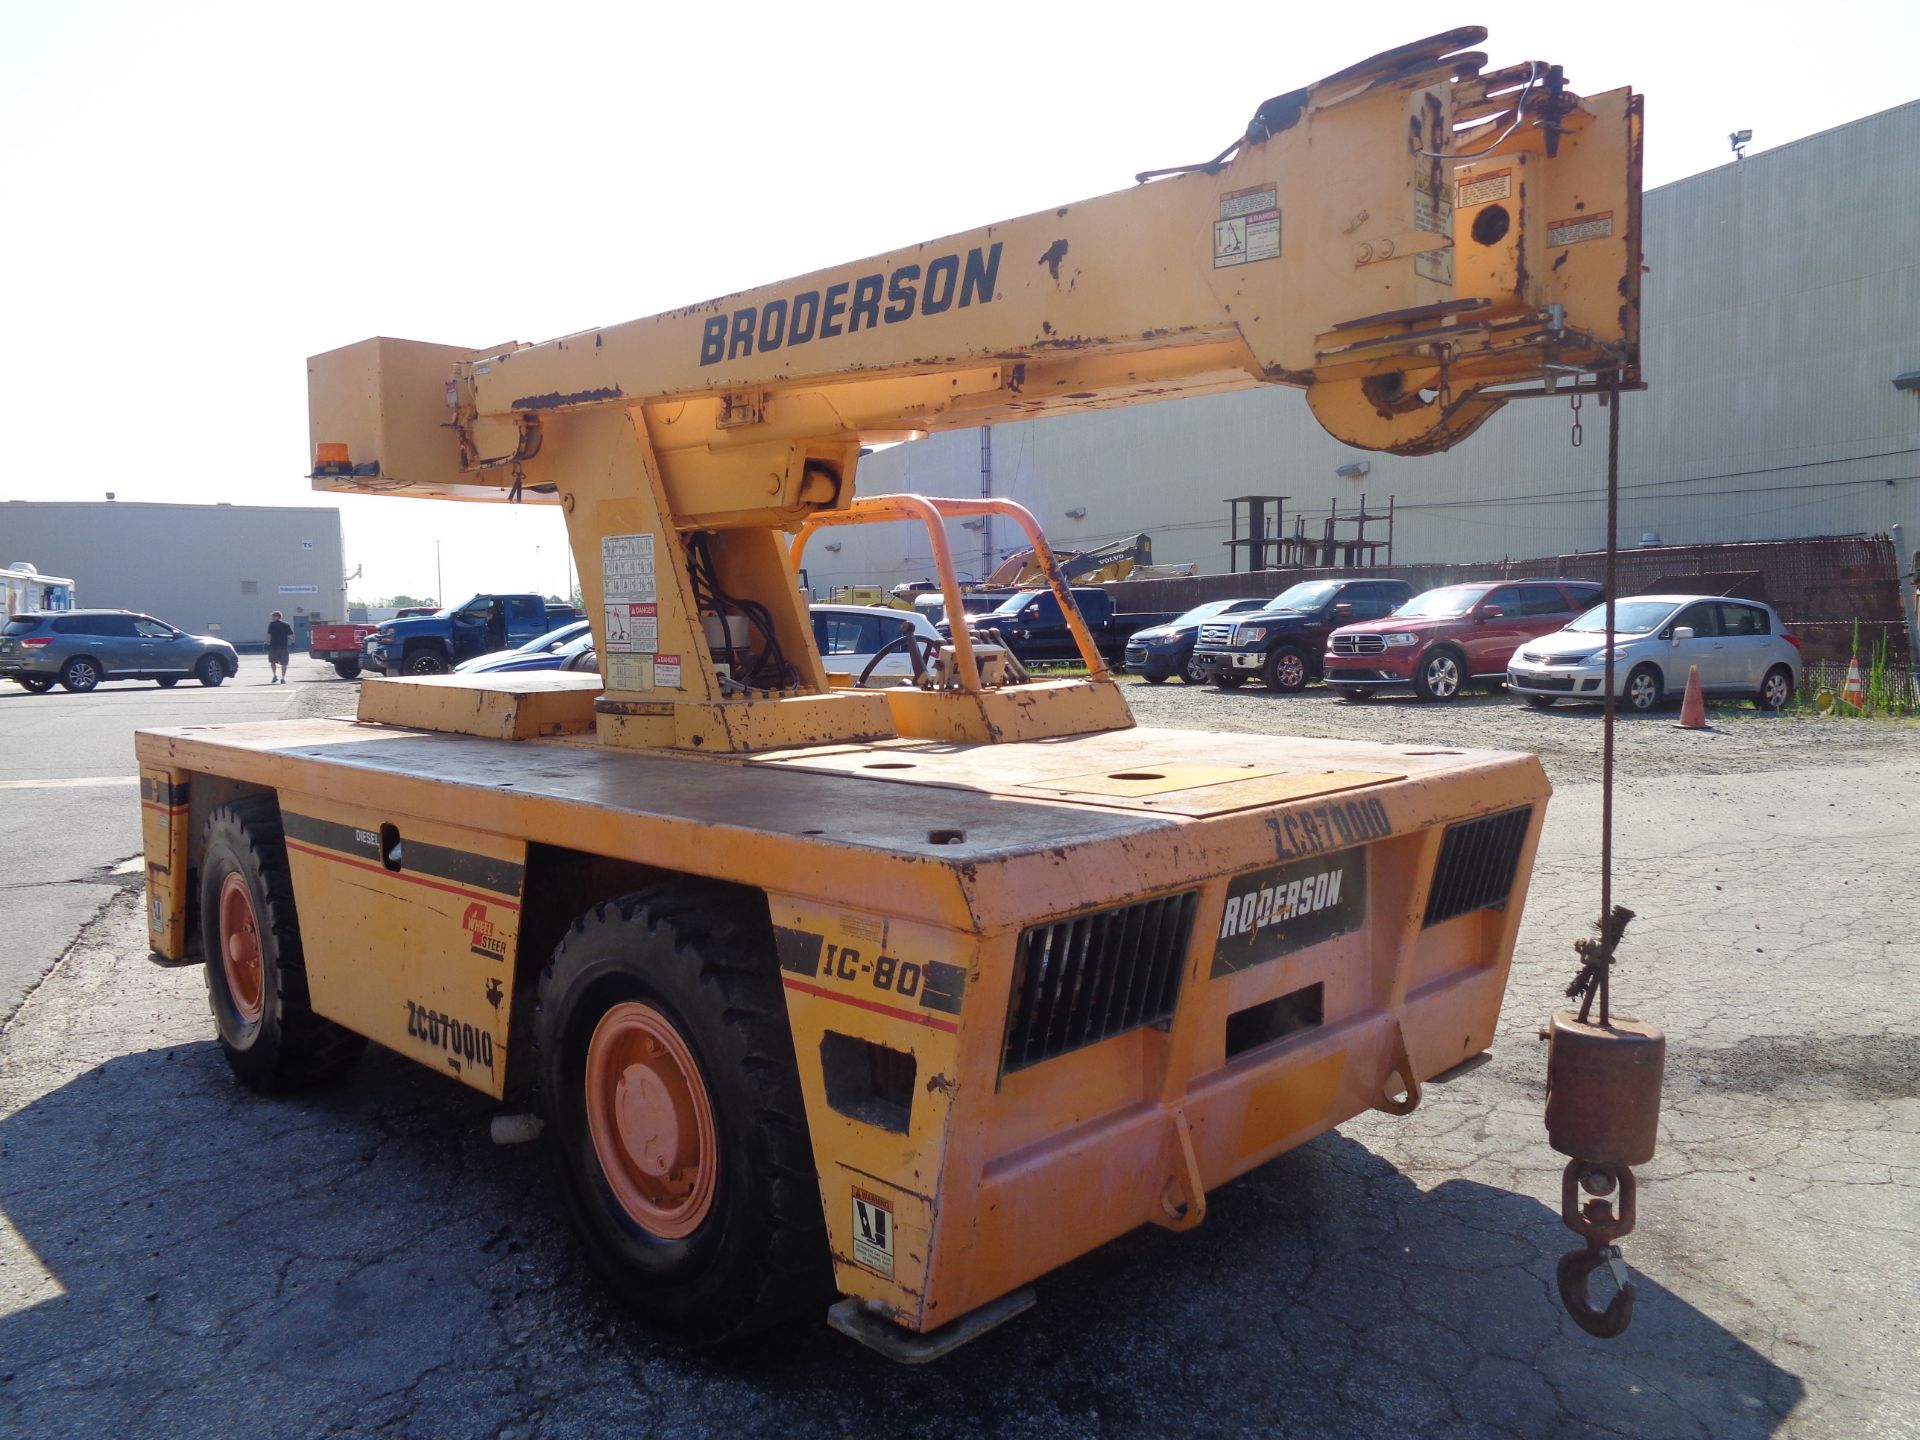 2007 Broderson IC-80-1G 17,000lb Carry Deck Hydraulic Crane - Image 10 of 13